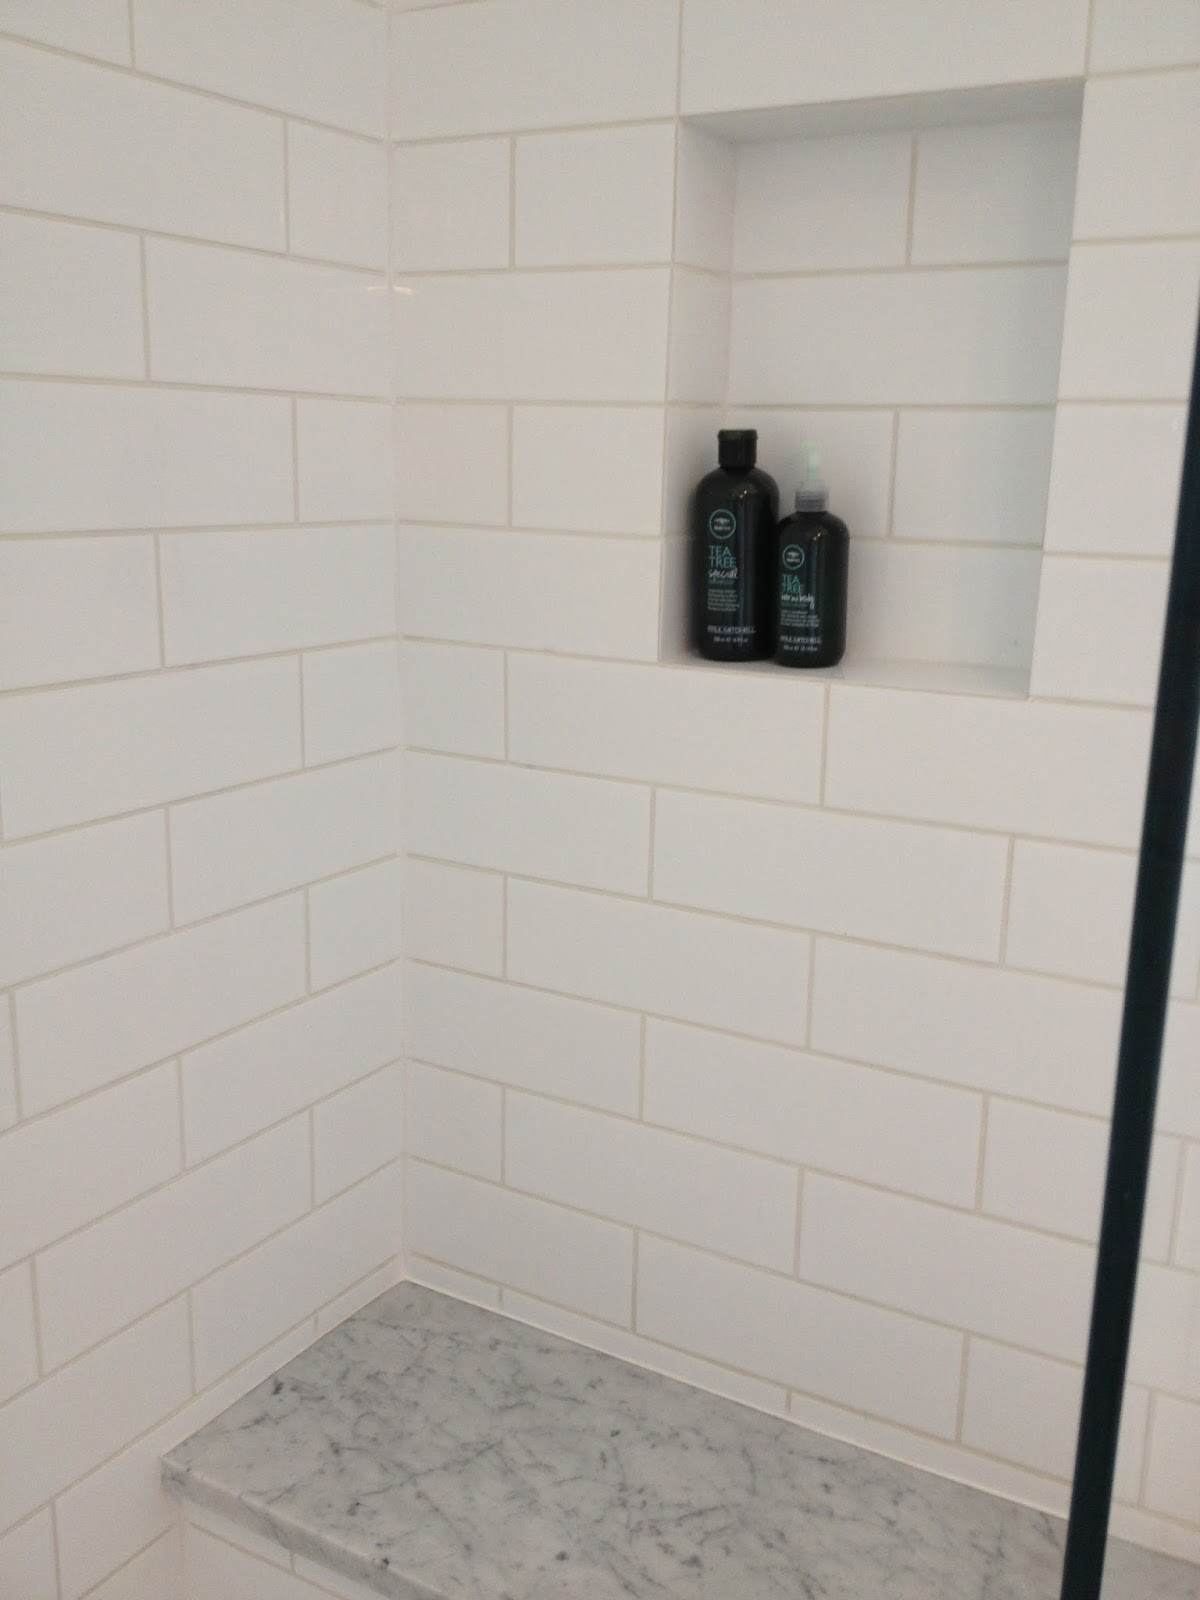 White Tile Bathroom Shower
 Building our dream home from the ground up House tour